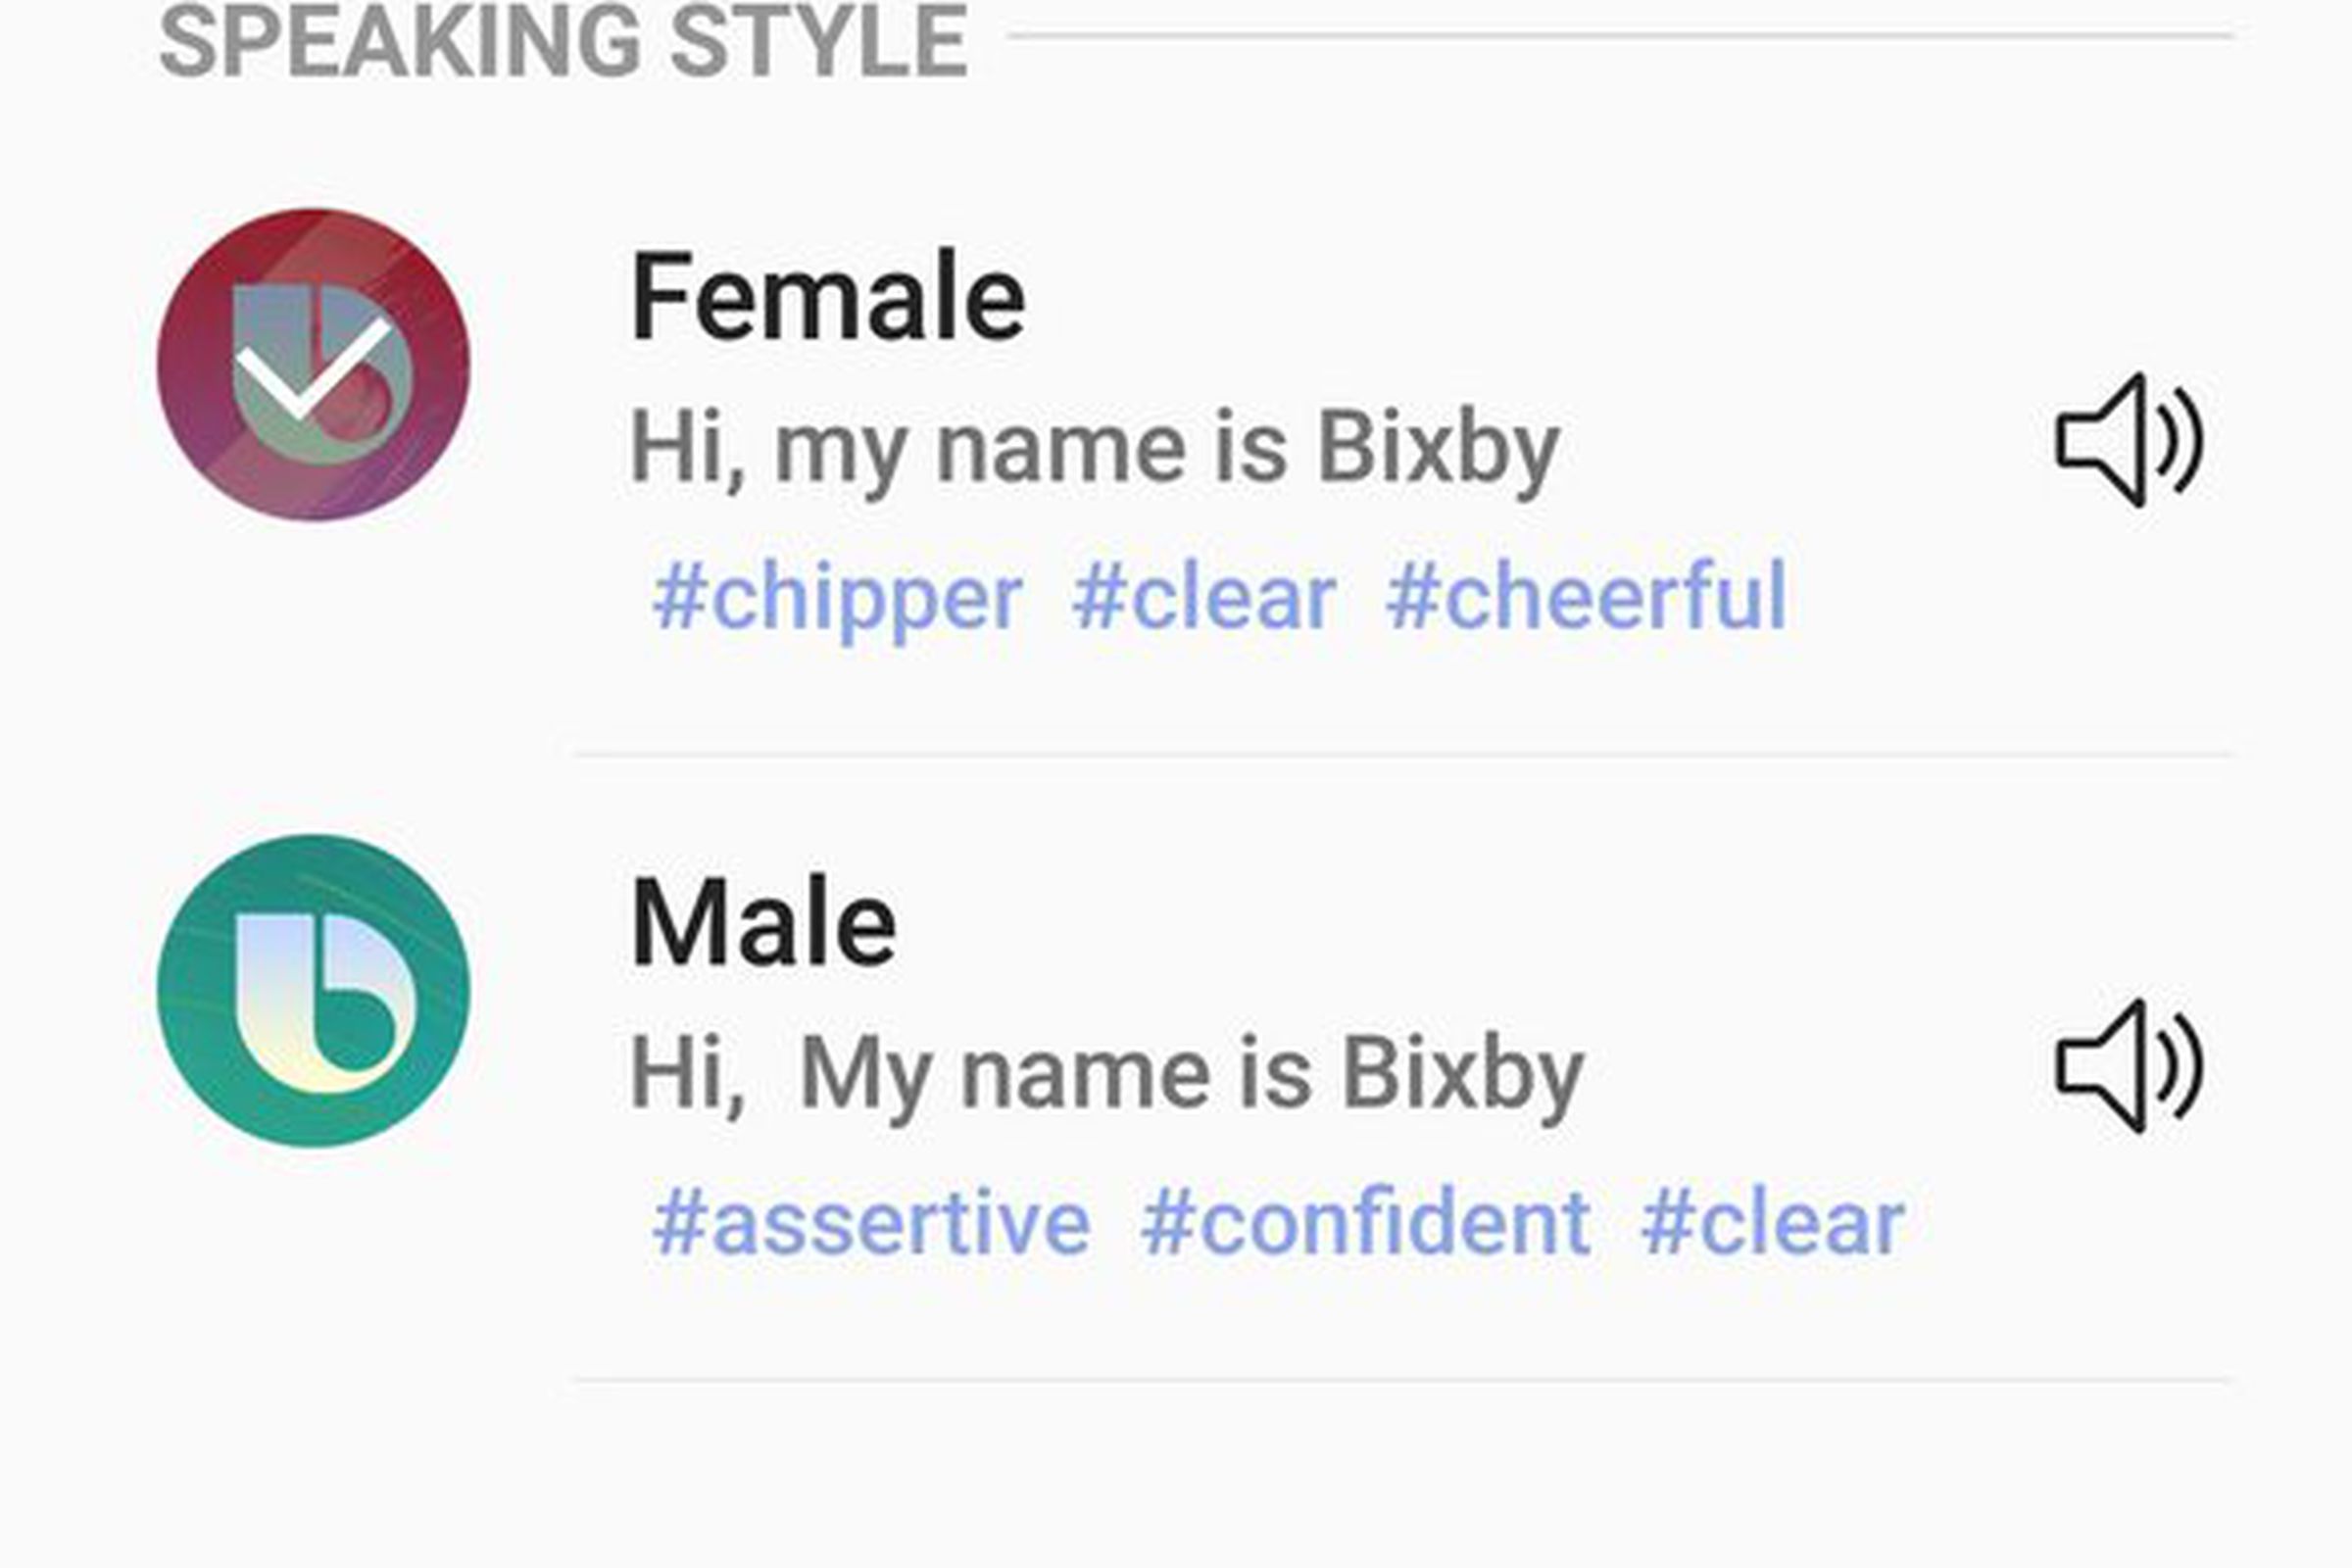 Samsung’s gendered Bixby hashtags